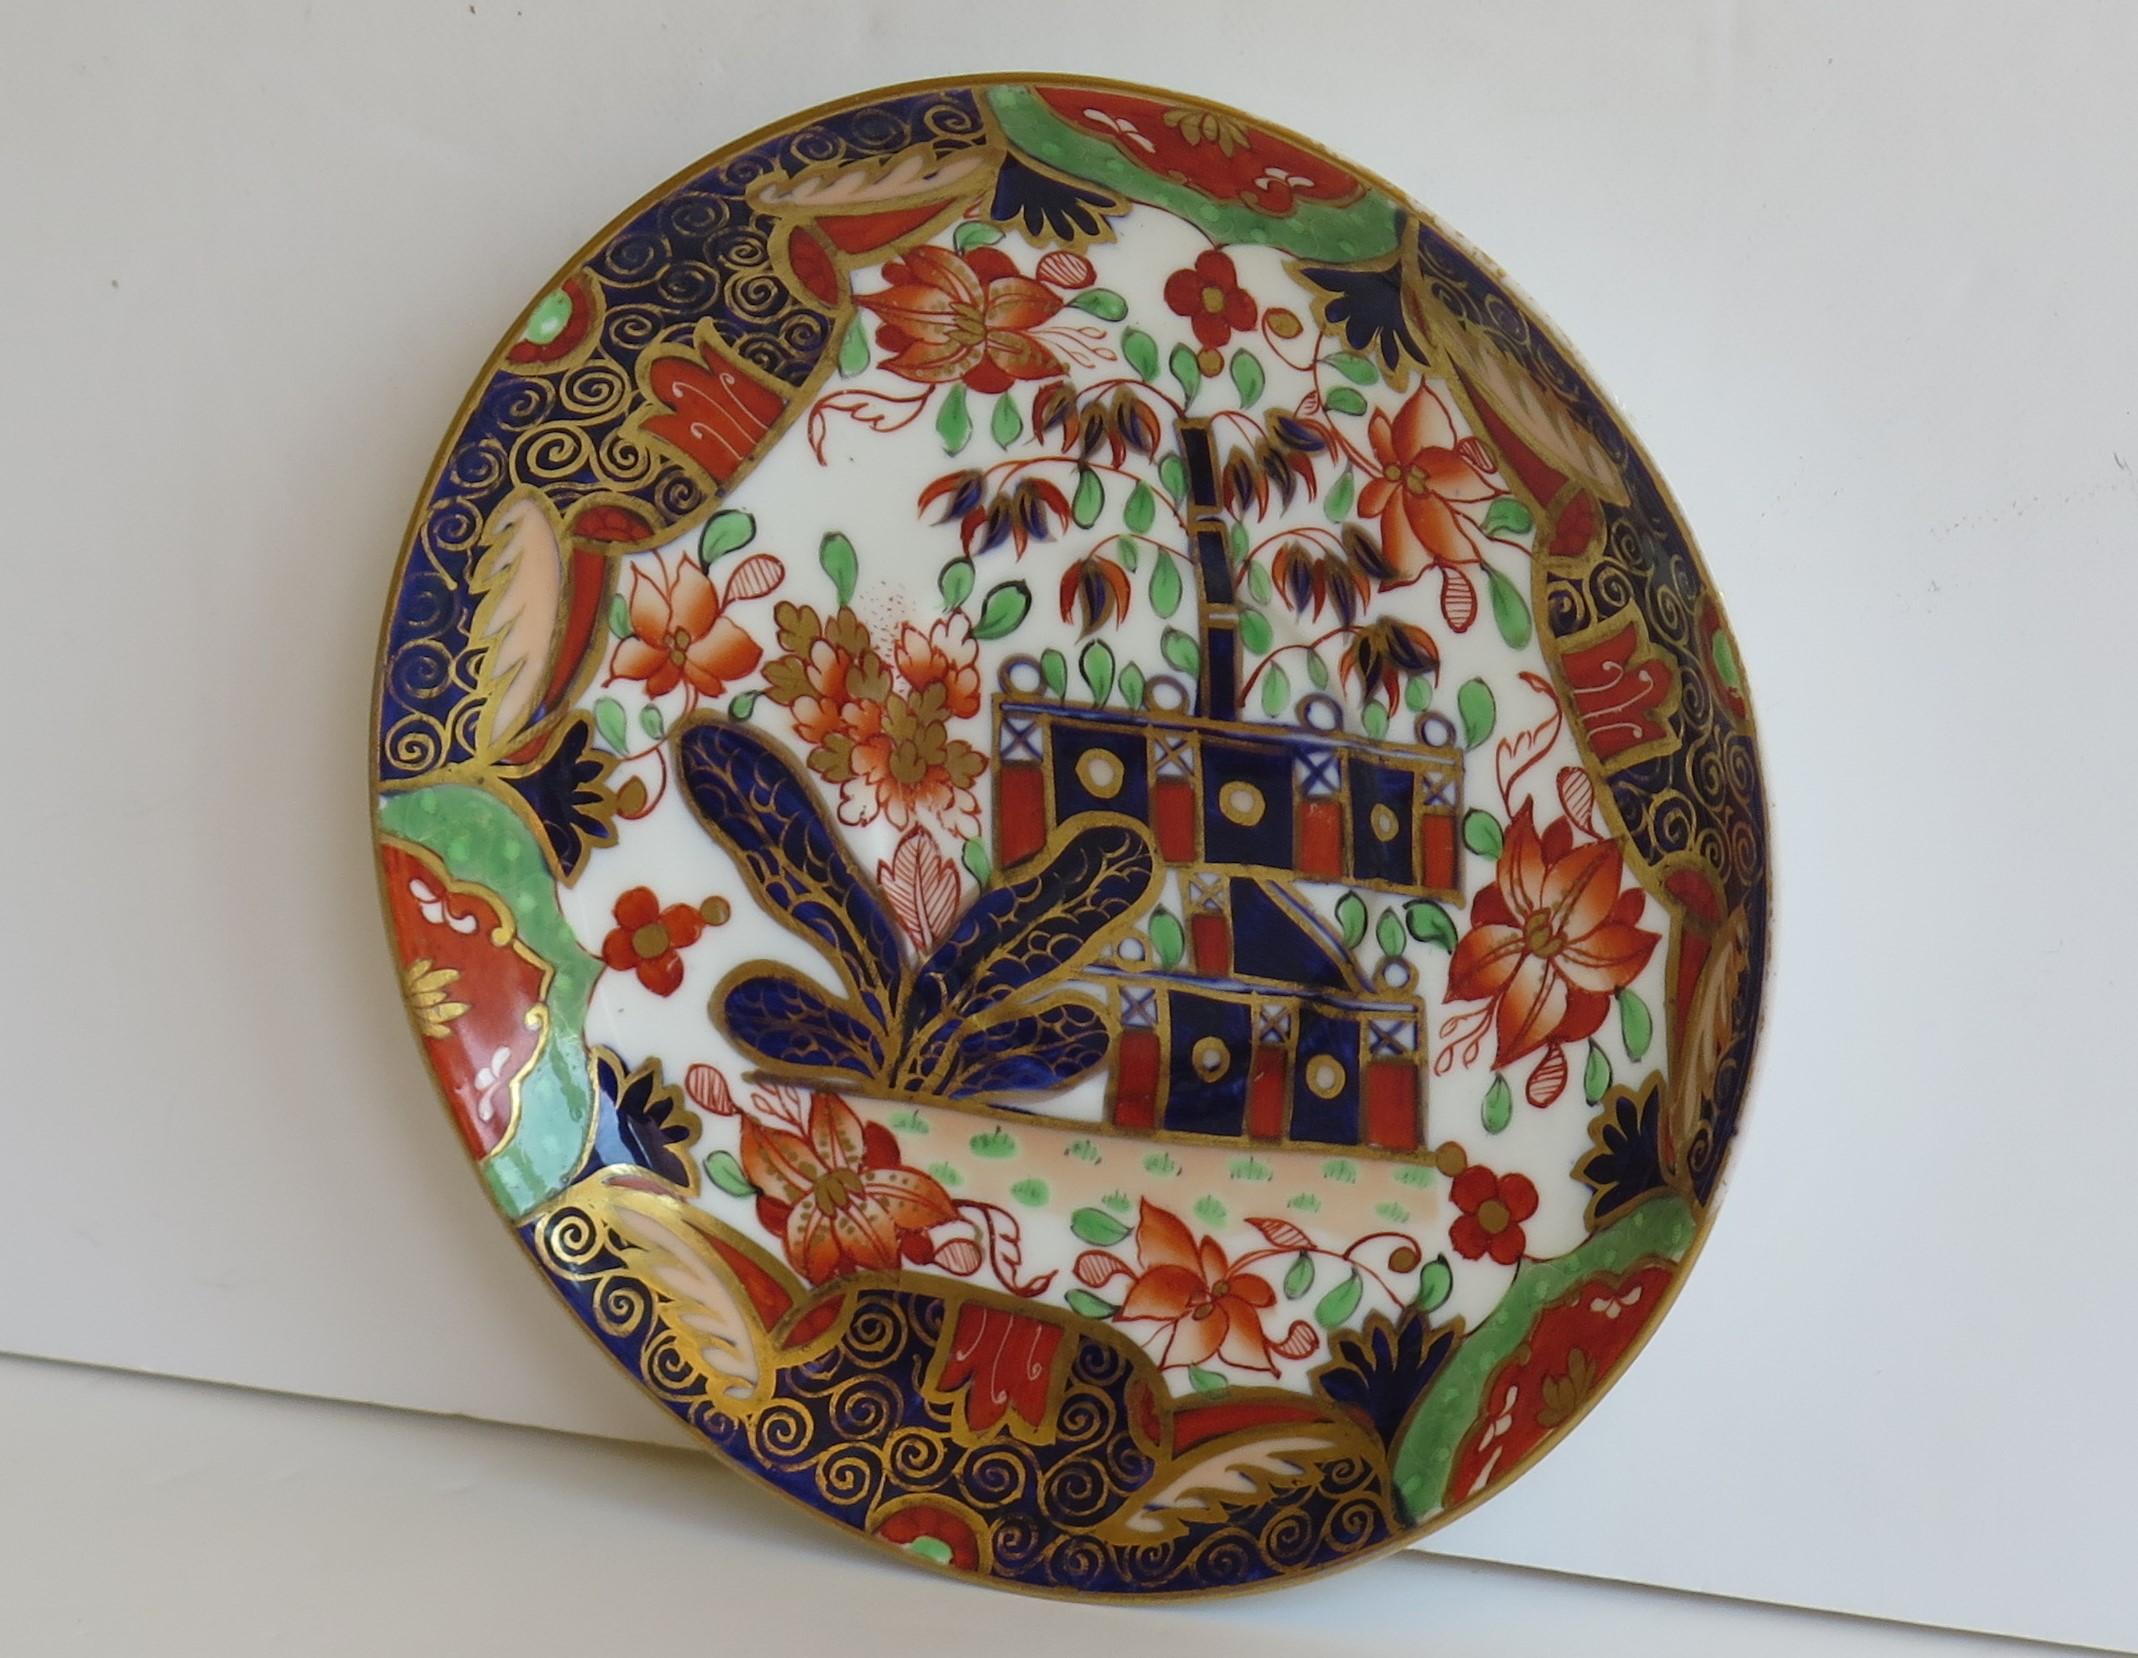 Hand-Painted Porcelain Saucer Dish by Copeland 'Spode' in Imari Fence Ptn No. 794, circa 1850